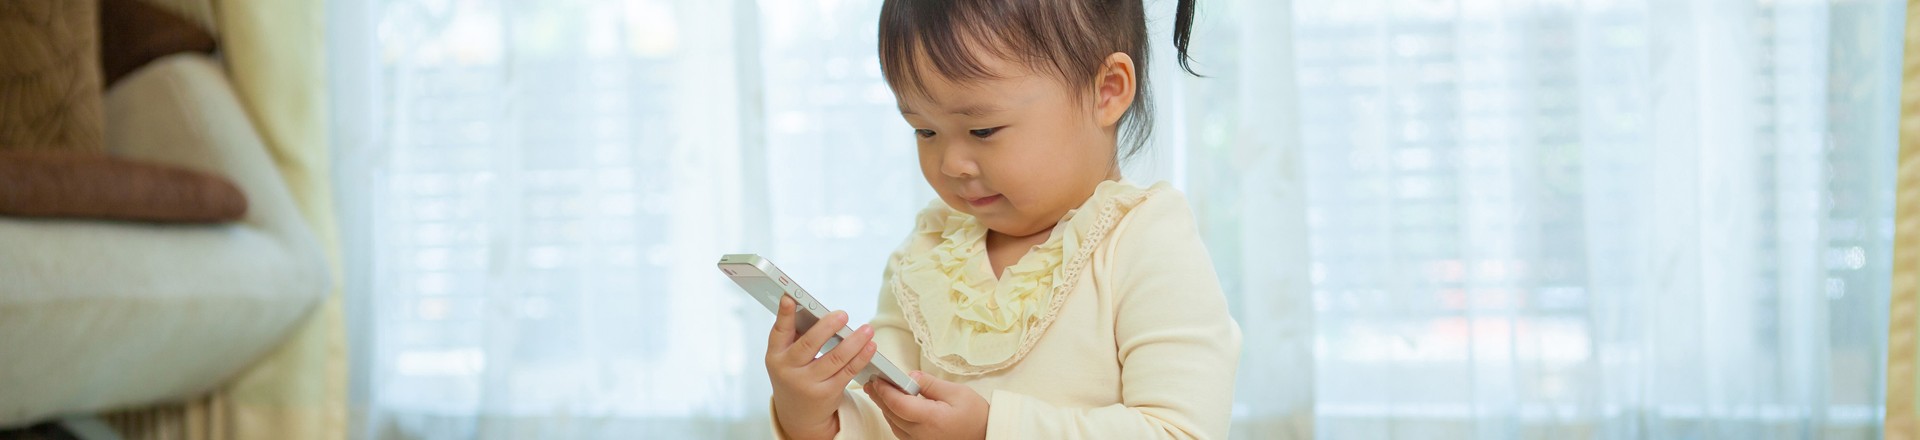 are cell phones dangerous to children?